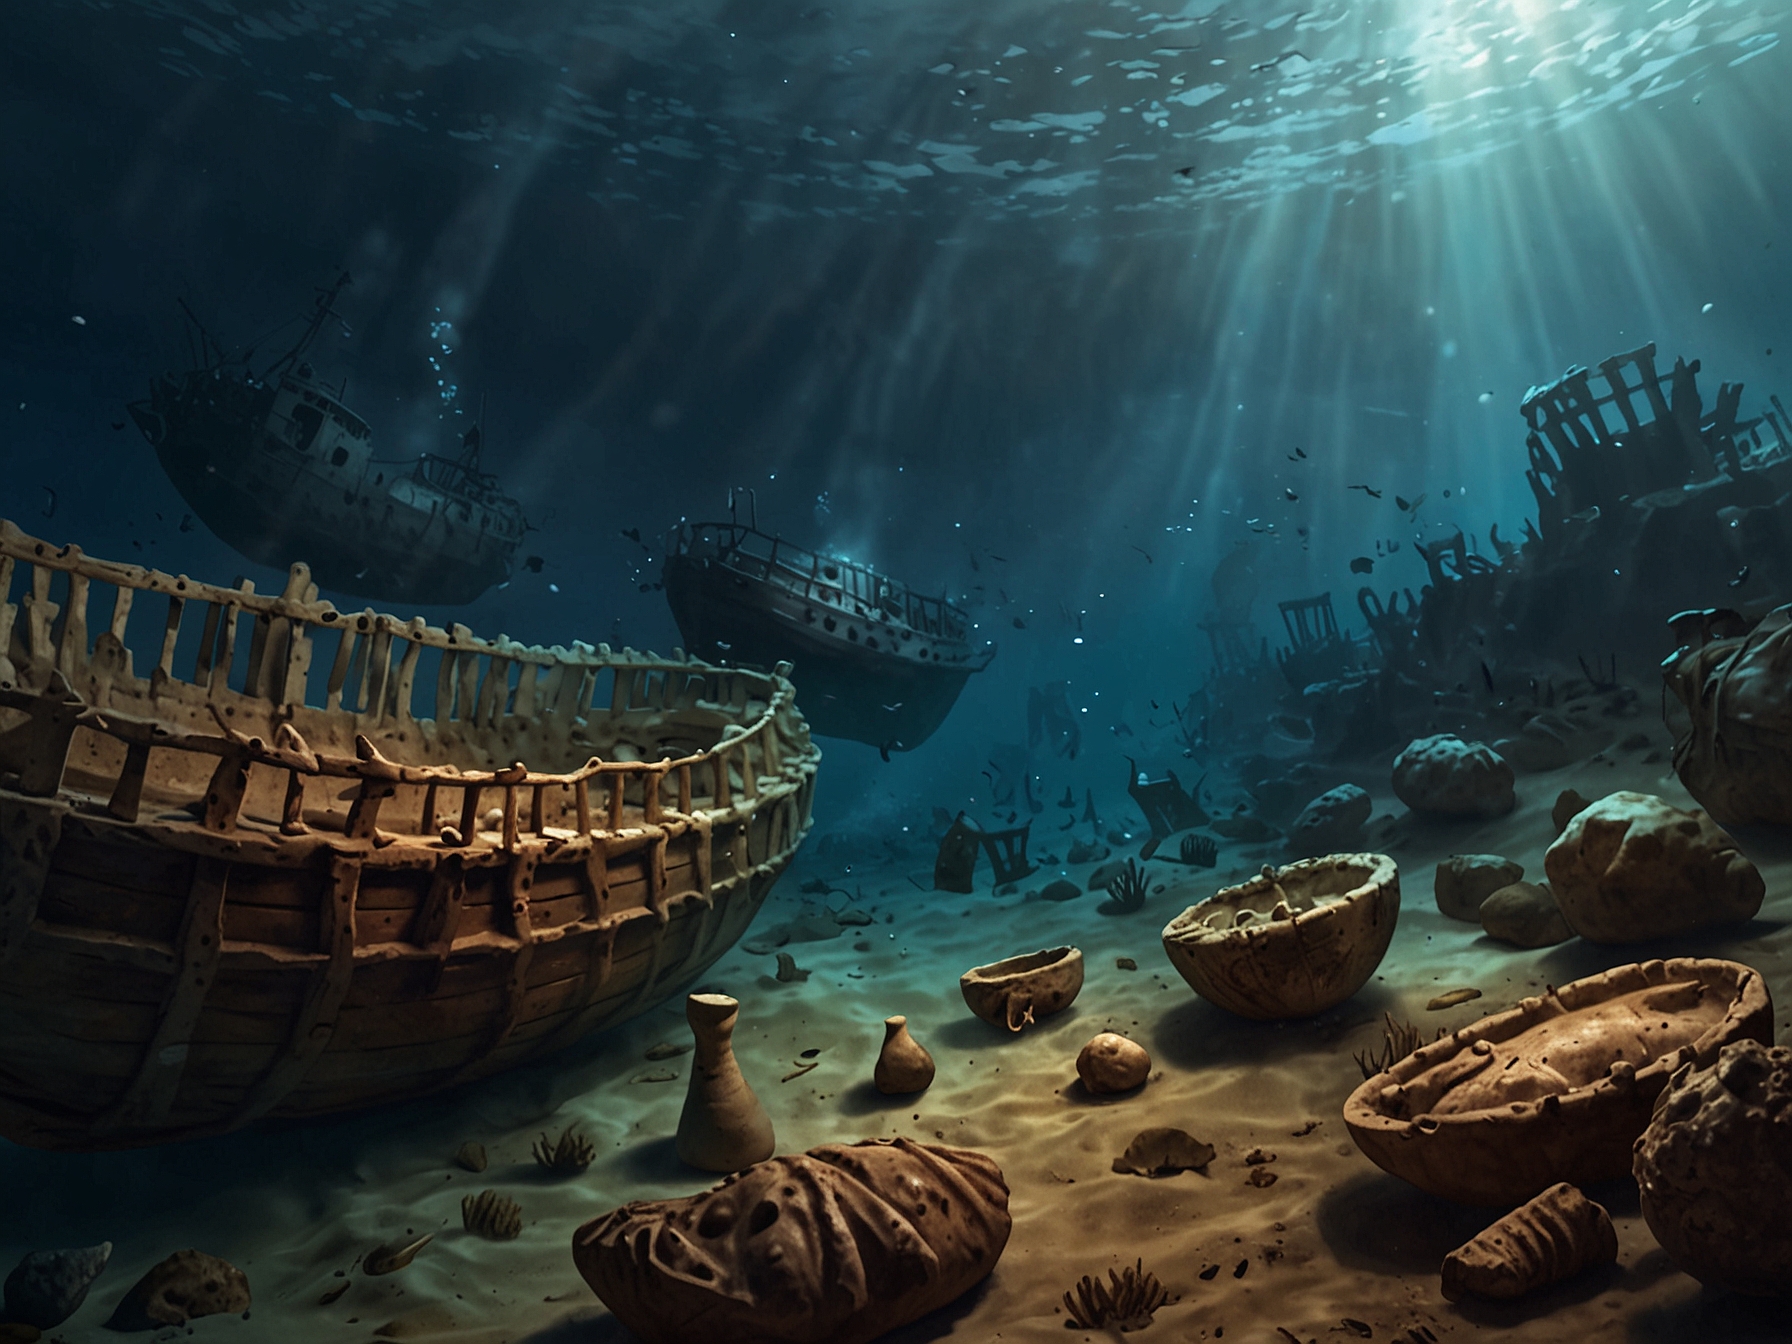 Researchers discover amphorae and artifacts within the ancient shipwreck, providing insights into the extensive trade networks and cultural exchanges across the Mediterranean in antiquity.